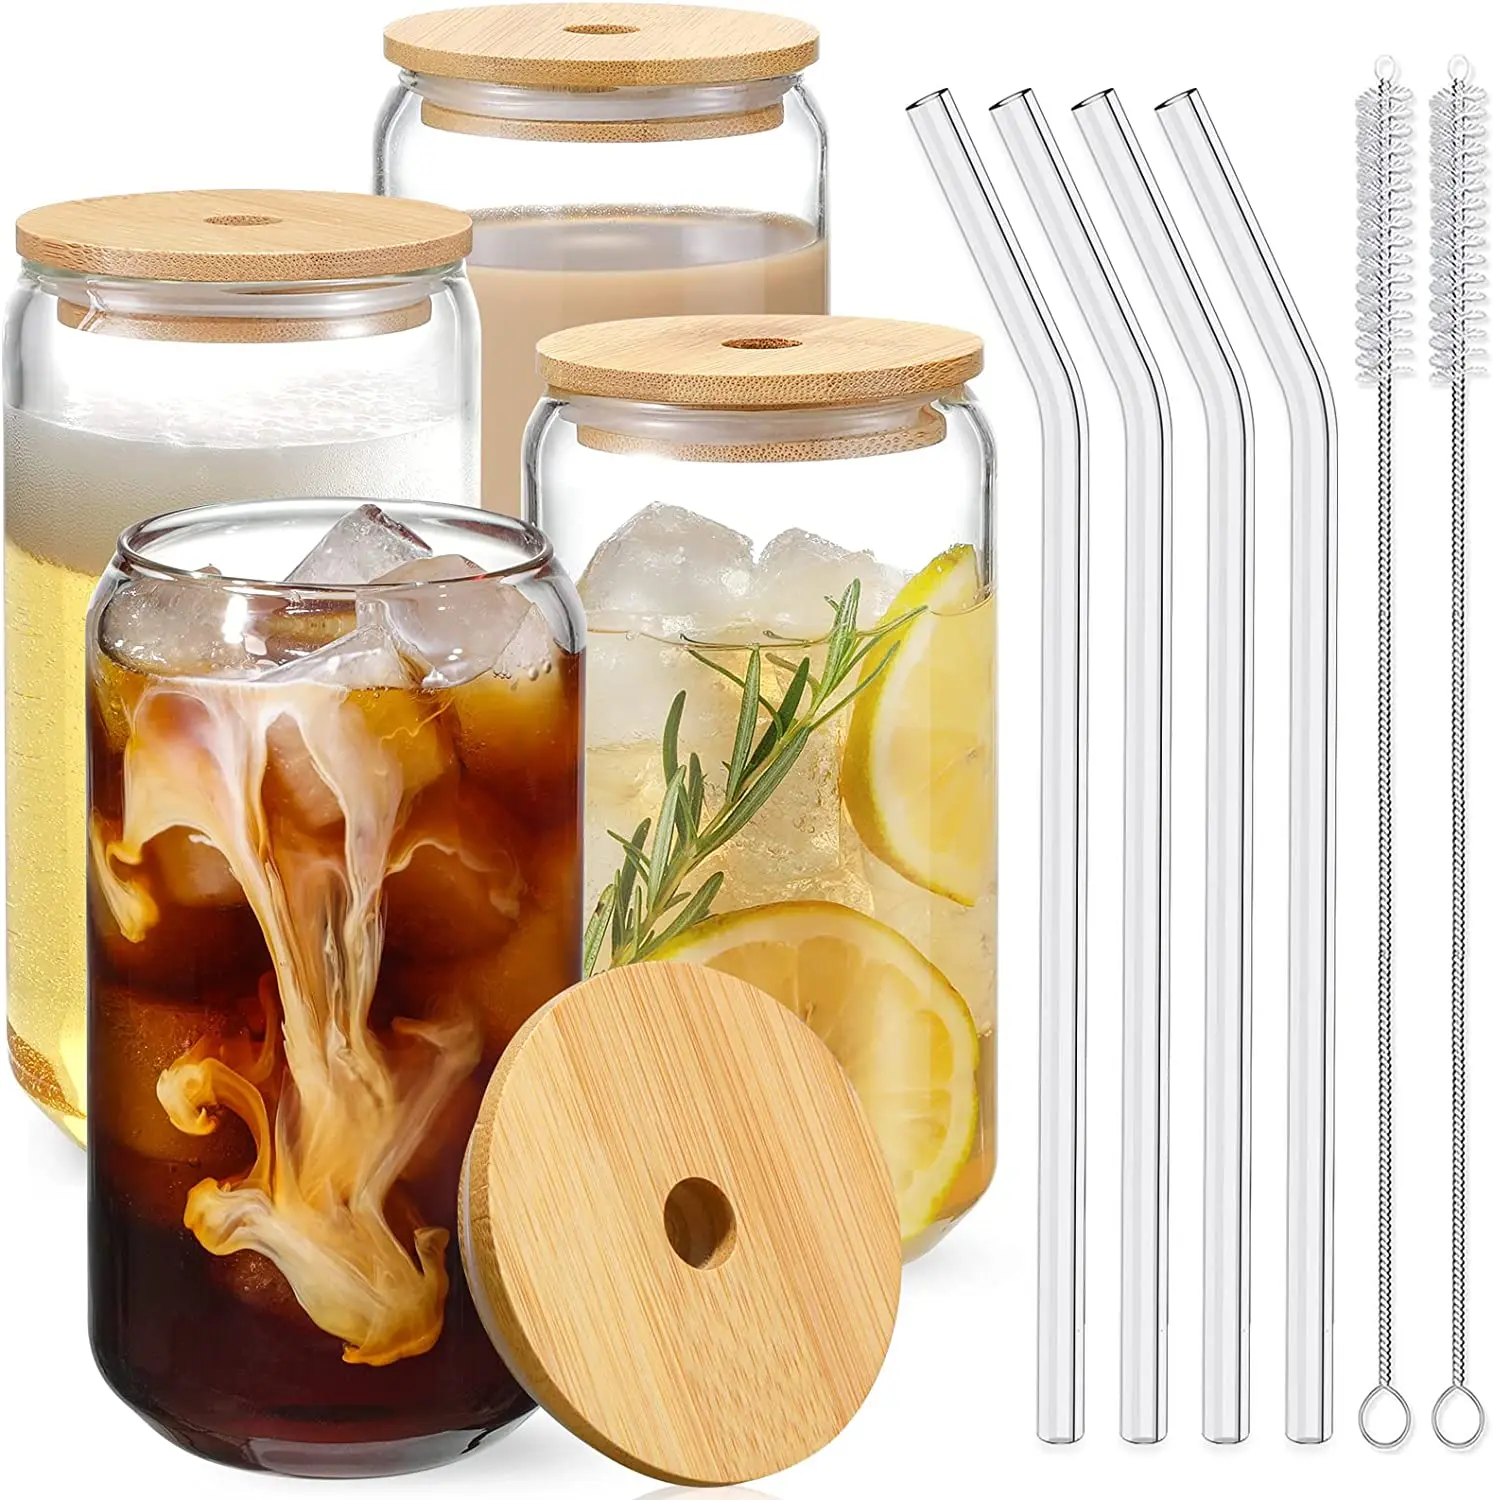 

16oz Coffee Mug Tea Cup Bar Glassware Clear Borosilicate Drinking Cocktail Glasses Water Tumbler Can Beer Glass With Lid Straw